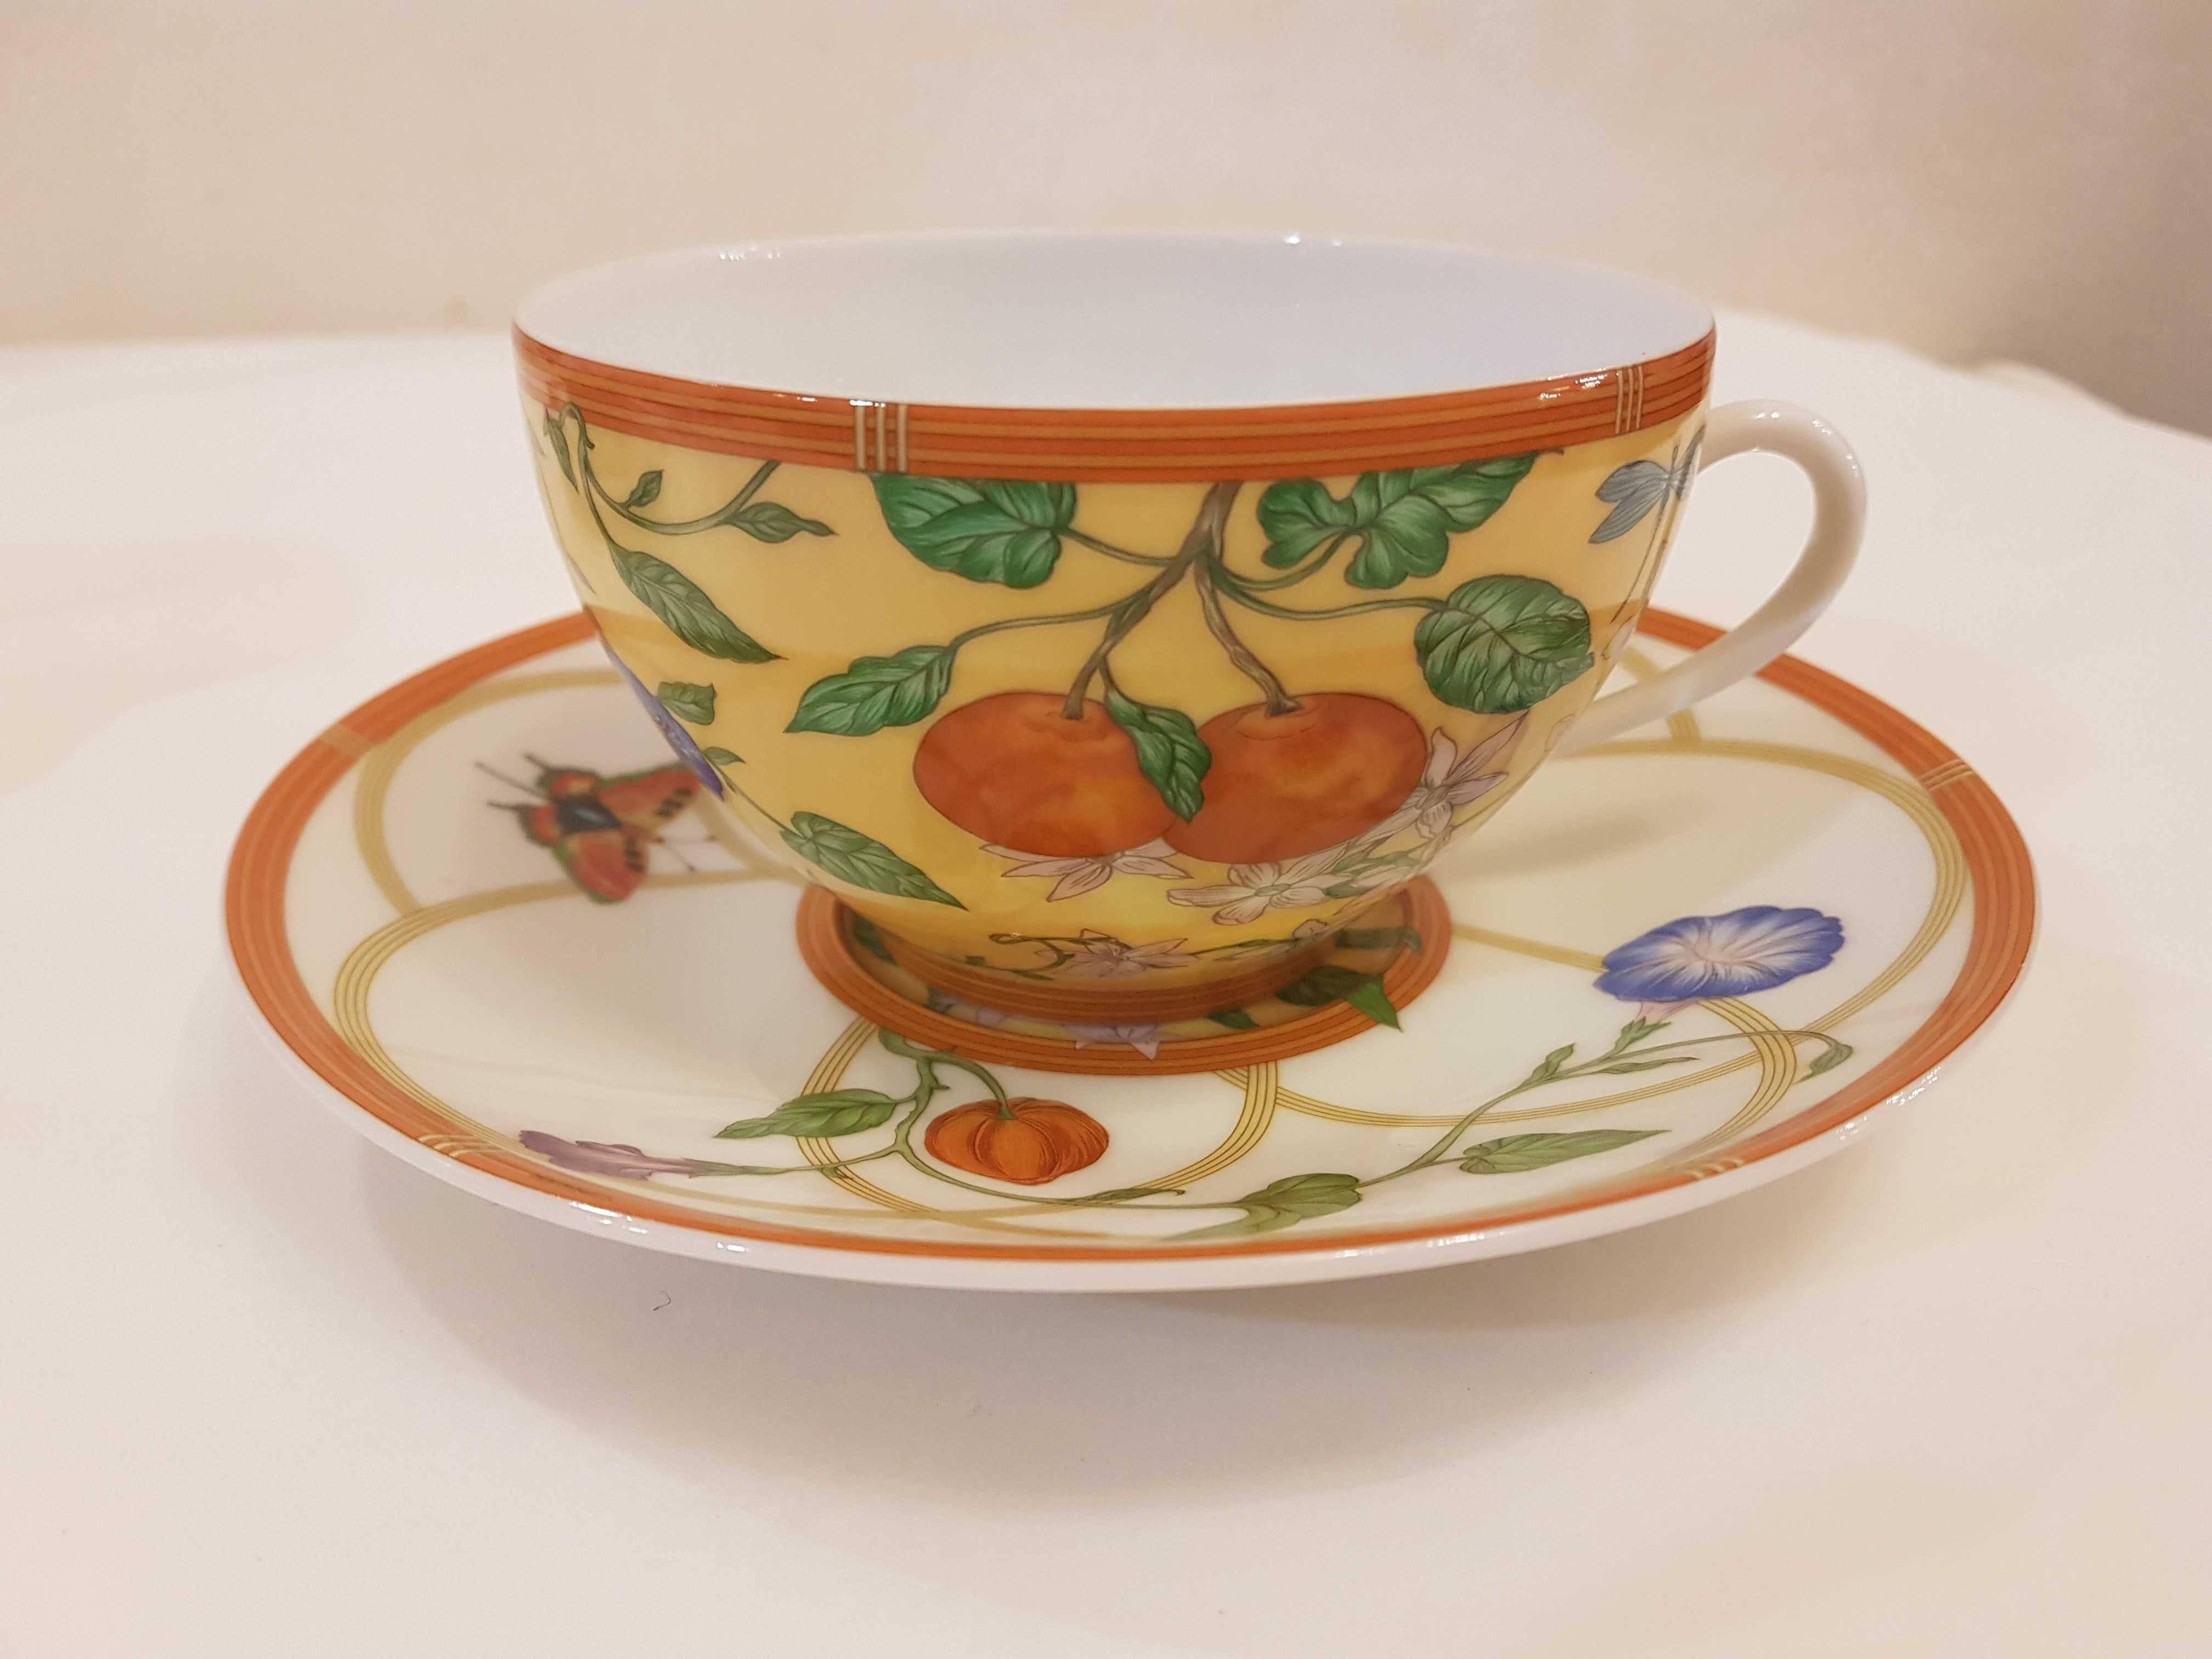 An Hermès polycrome porcelain breakfast set comprising two cups and two saucers.
Siesta pattern decorated with a motif of flowers, fruits and butterflies.
Pattern discontinued today.